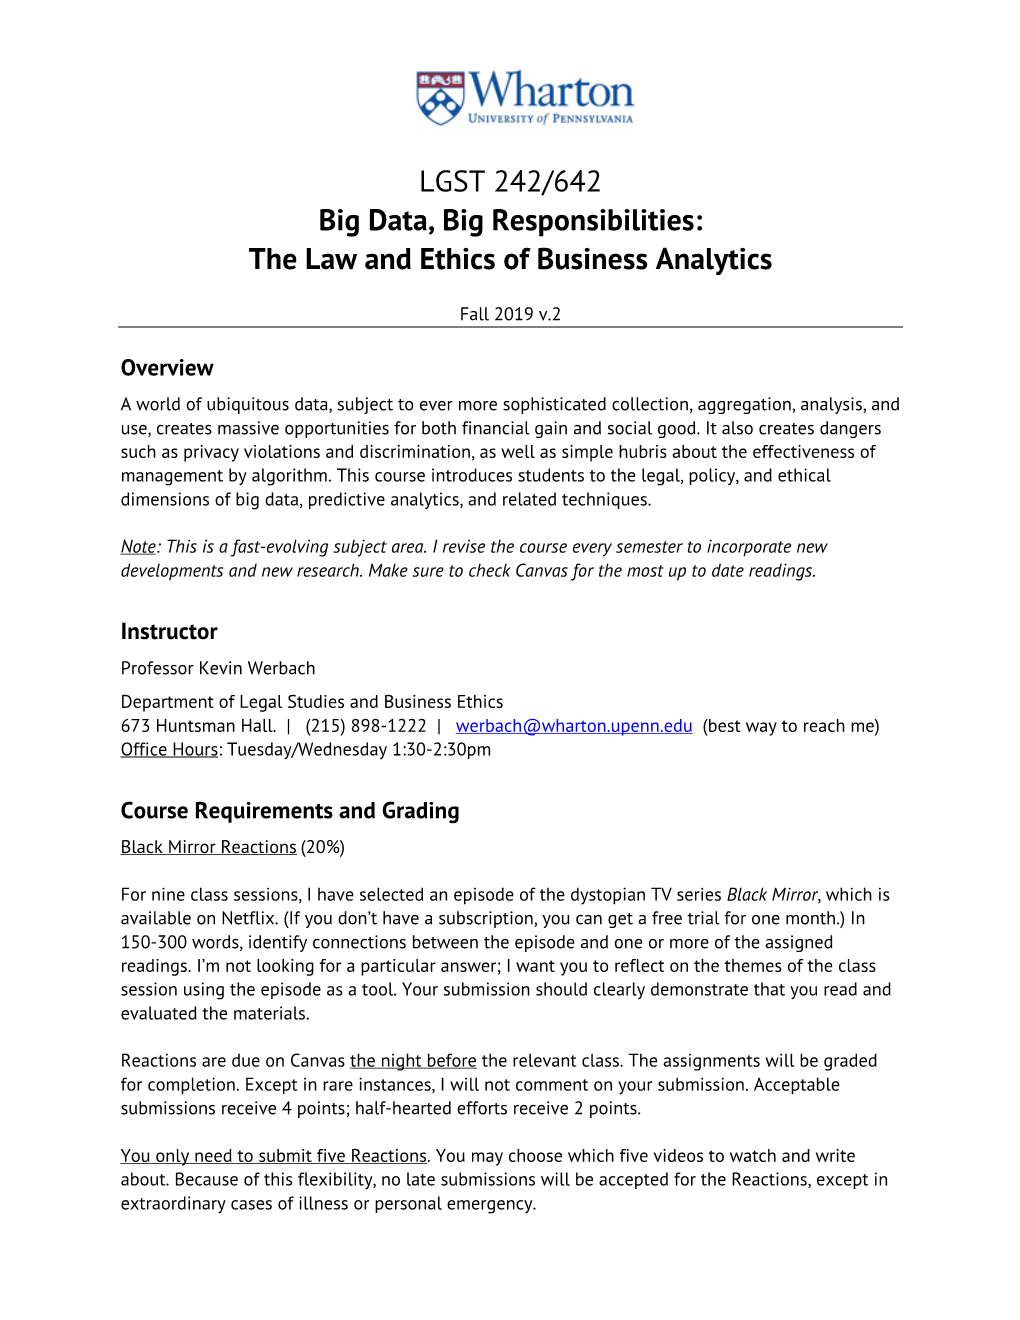 LGST 242/642: Big Data, Big Responsibilities: the Law and Ethics of Business Analytics